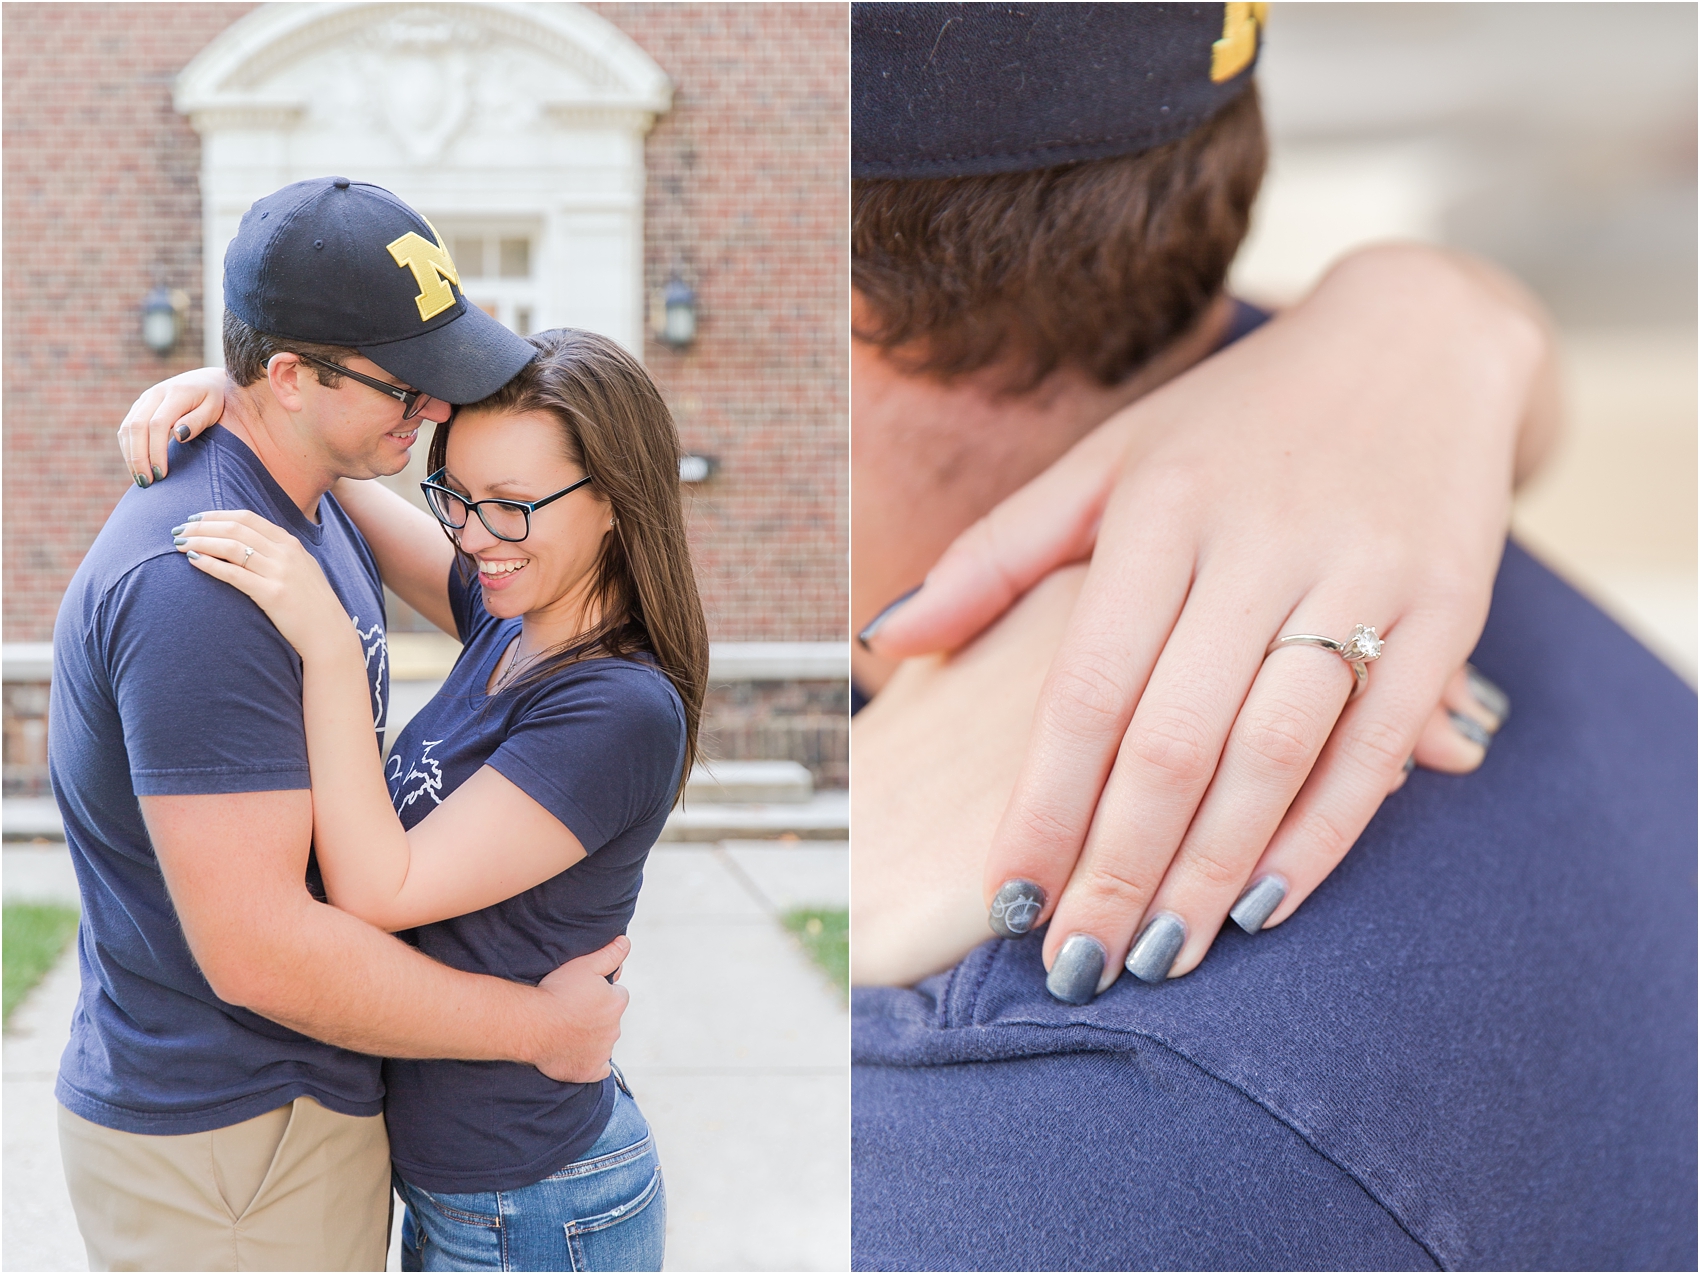 classic-fall-engagement-photos-at-the-university-of-michigan-in-ann-arbor-mi-by-courtney-carolyn-photography_0014.jpg